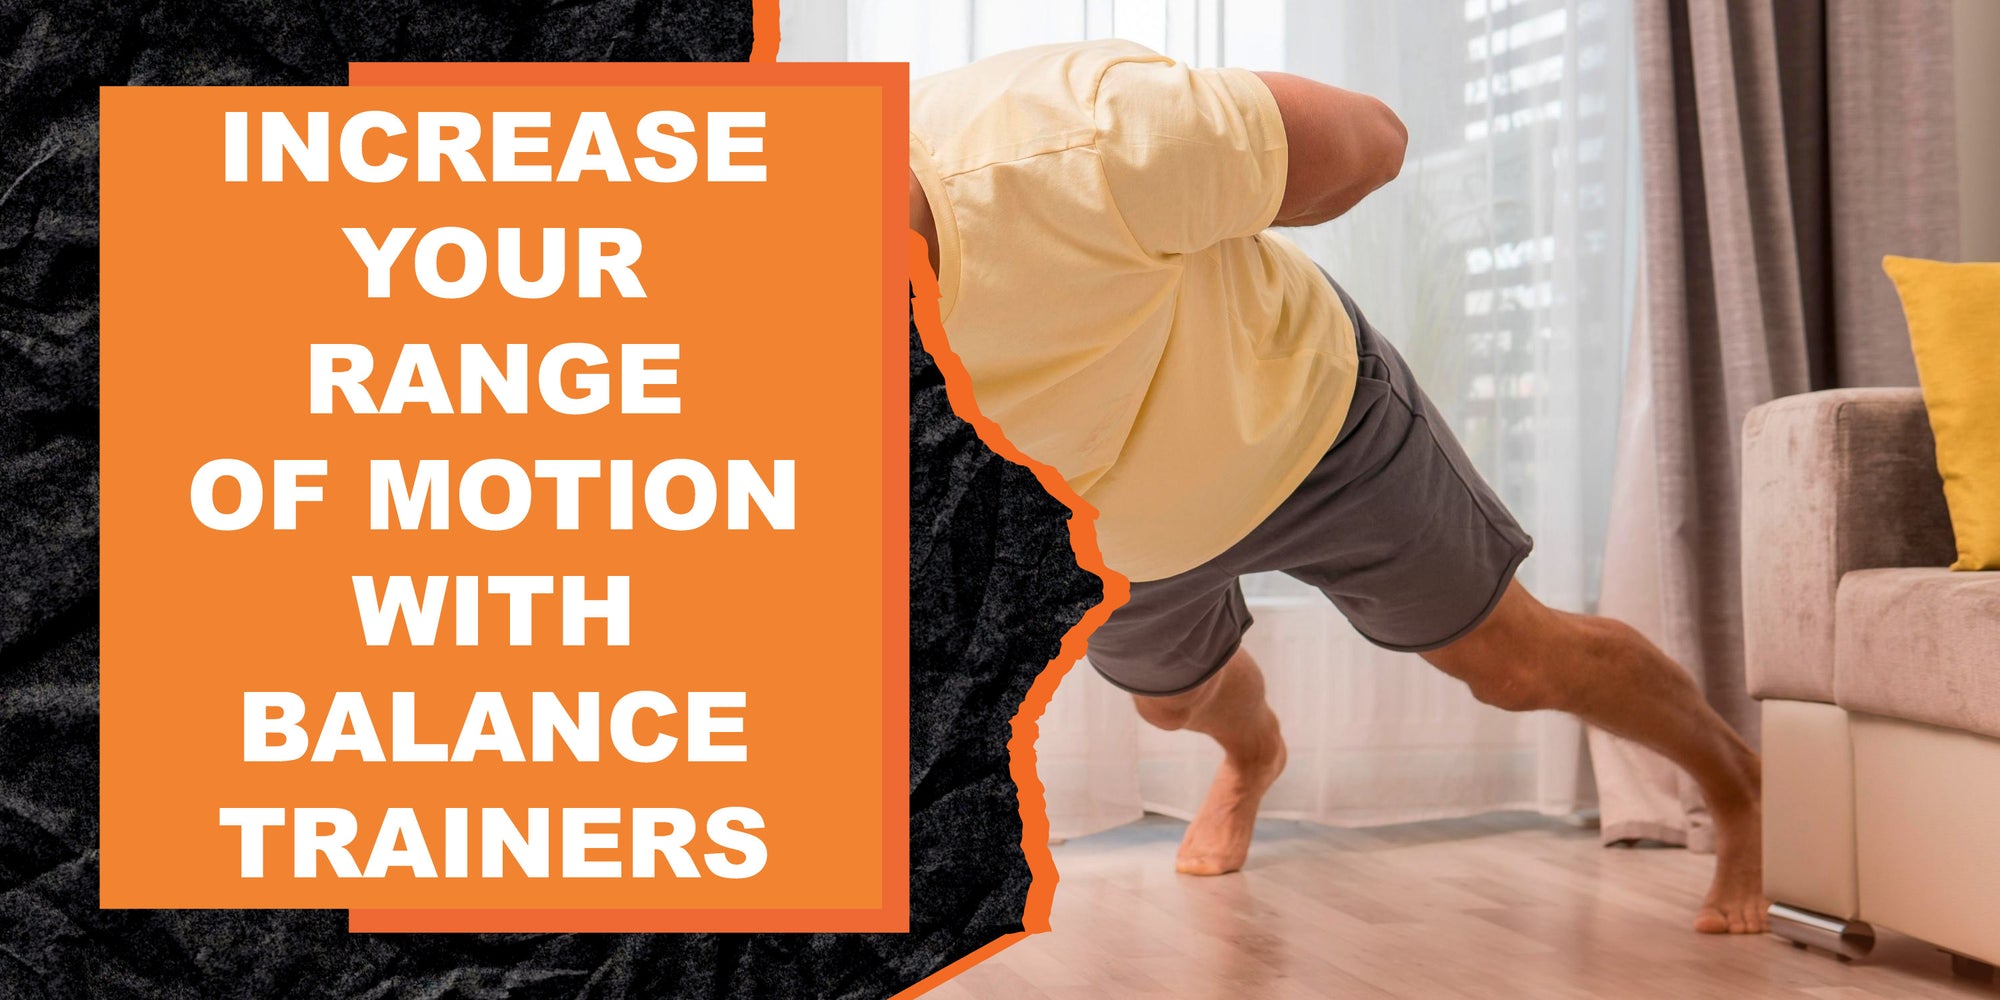 Increase Your Range of Motion With Balance Trainers